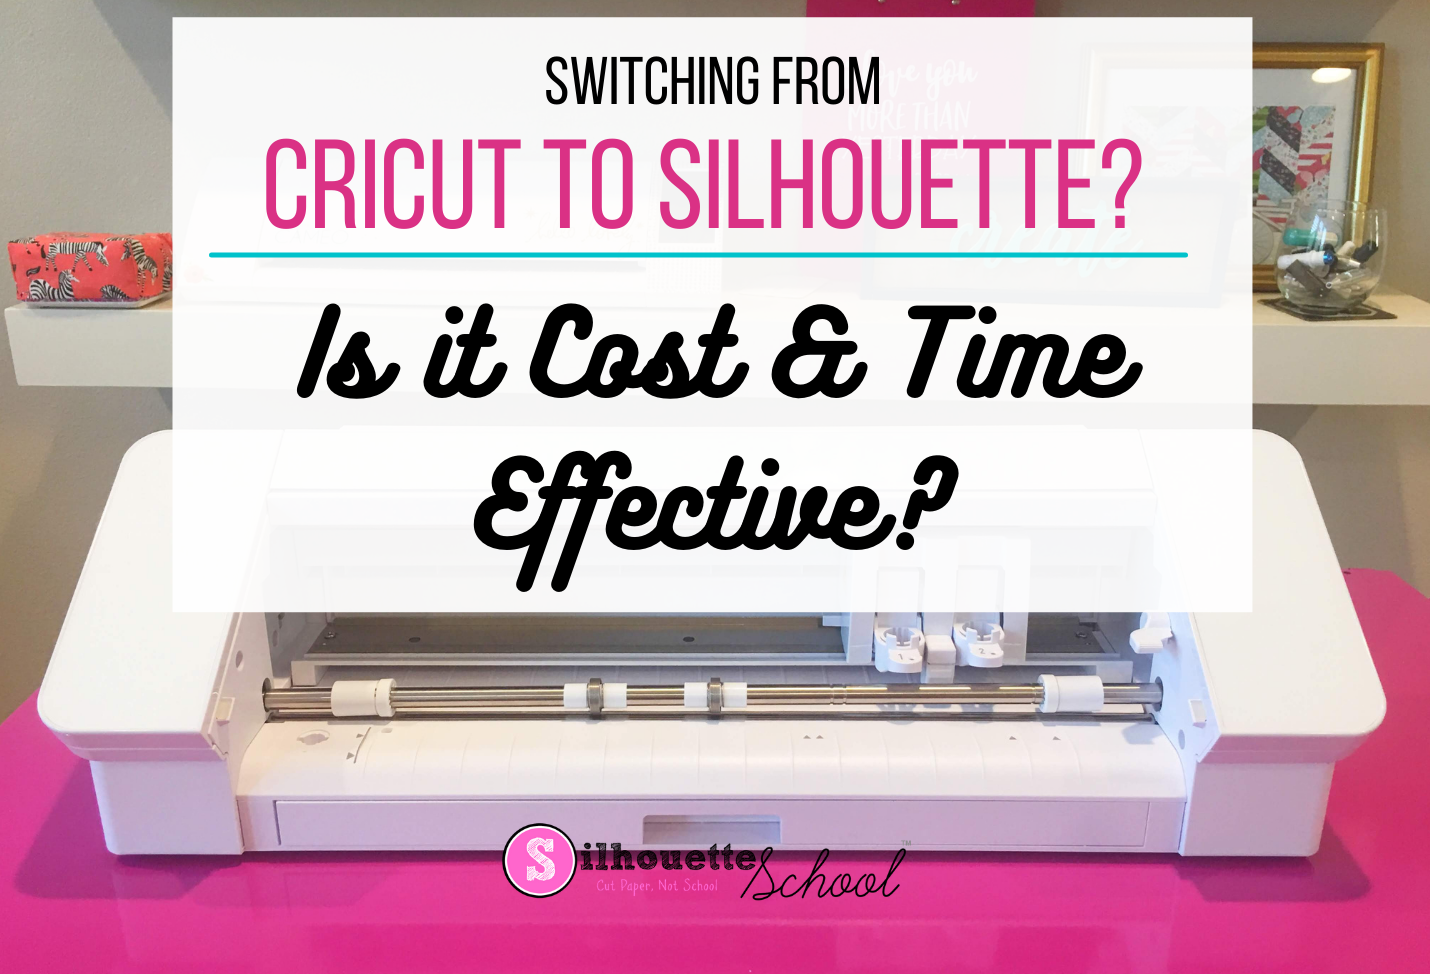 udtale brydning Higgins Is it Cost and Time Effective to Switch from Cricut to Silhouette? -  Silhouette School